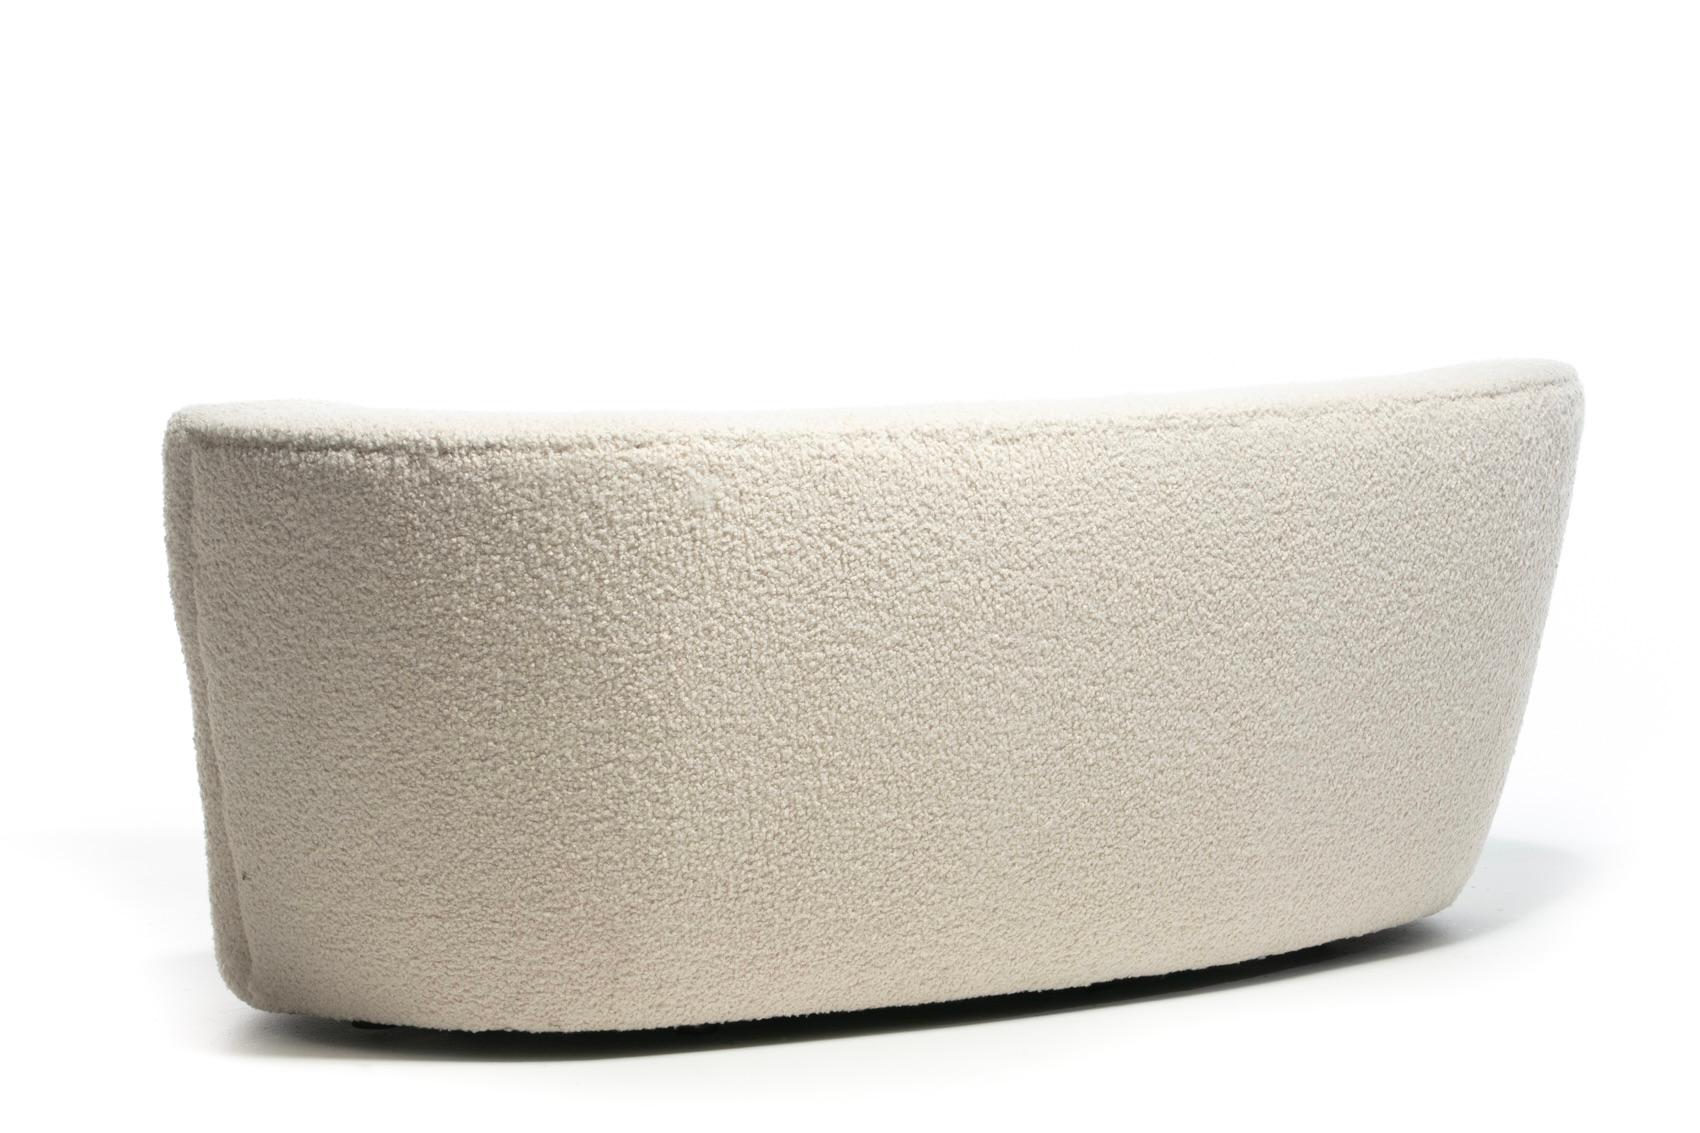 Vladimir Kagan Nautilus Sofa in Ivory White Bouclé by Directional, c. 1990 For Sale 5